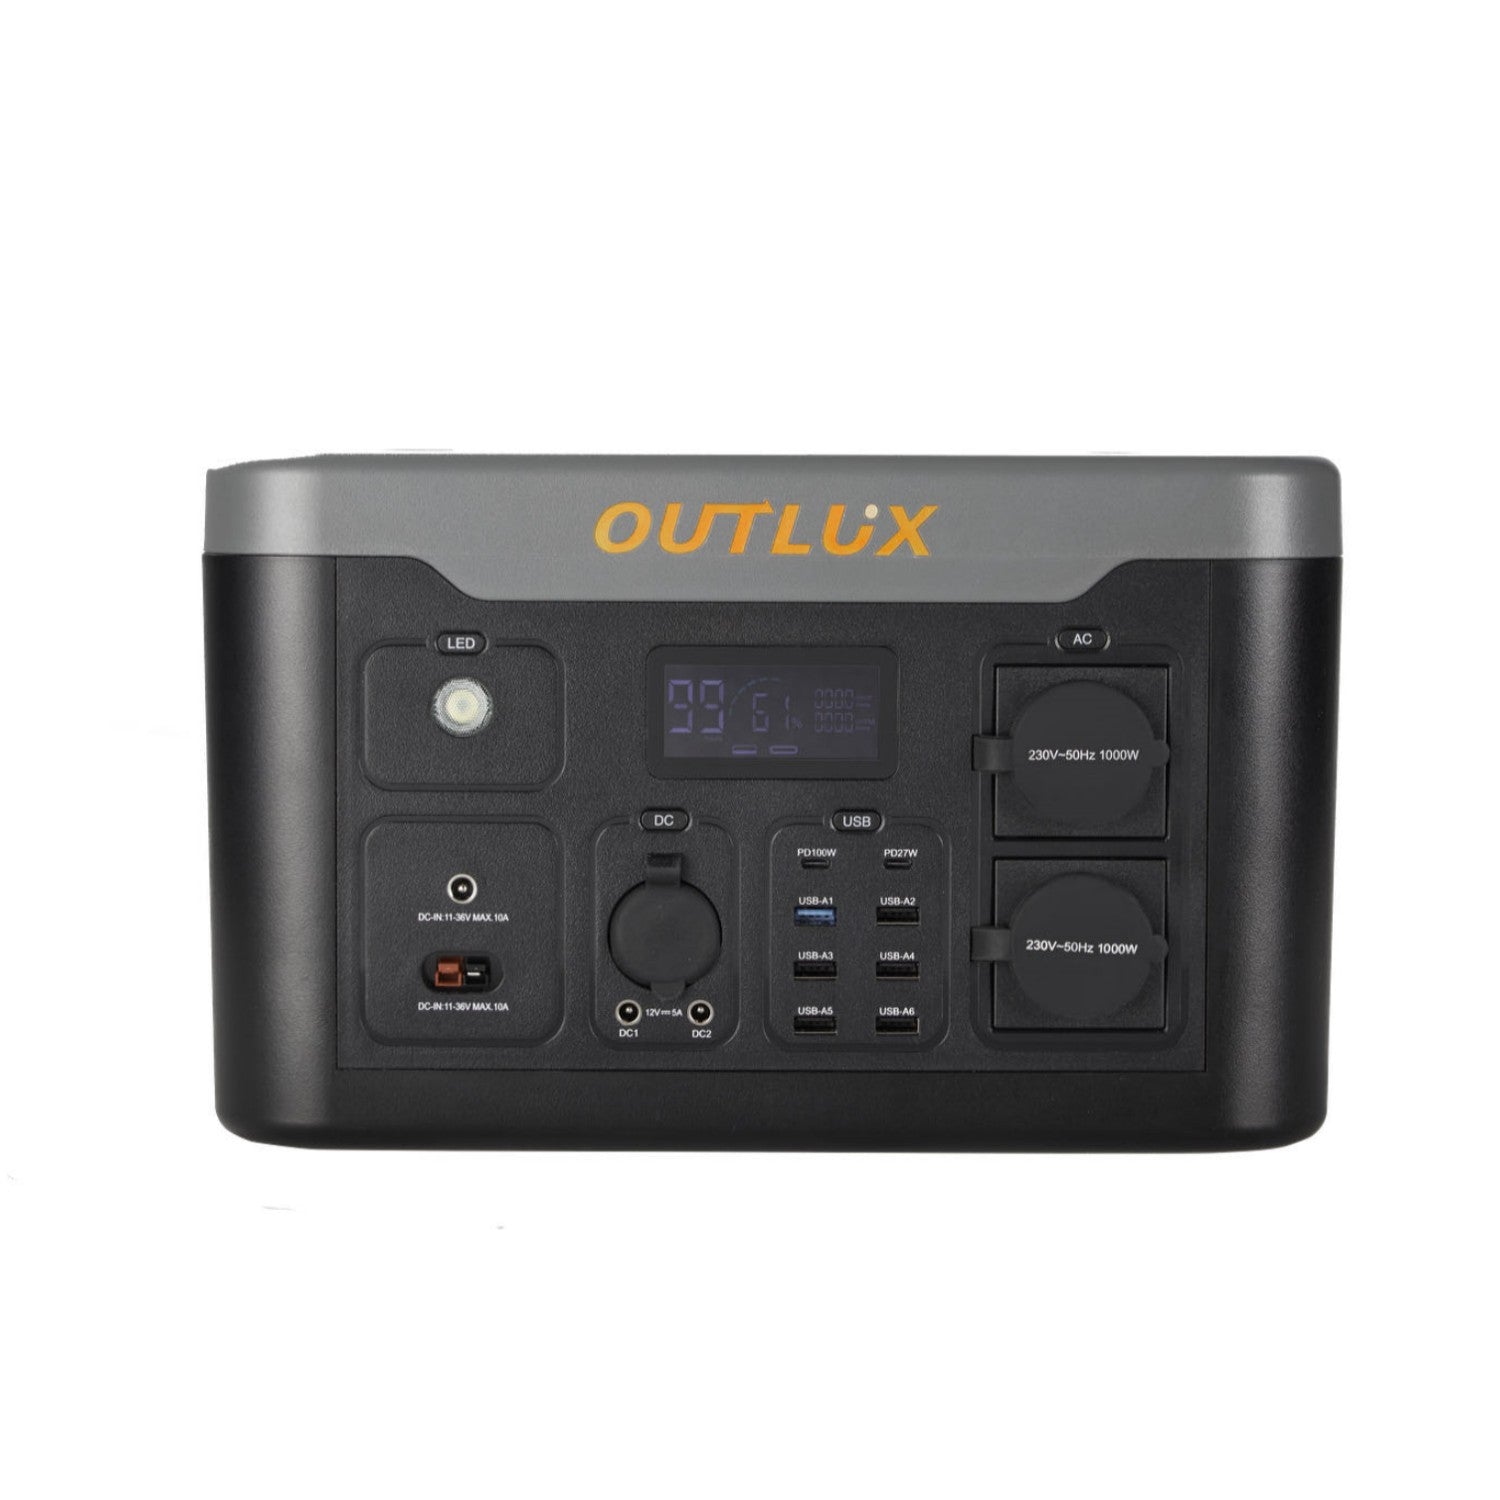 Outlux 1000w Portable Power Station-Multifunctional